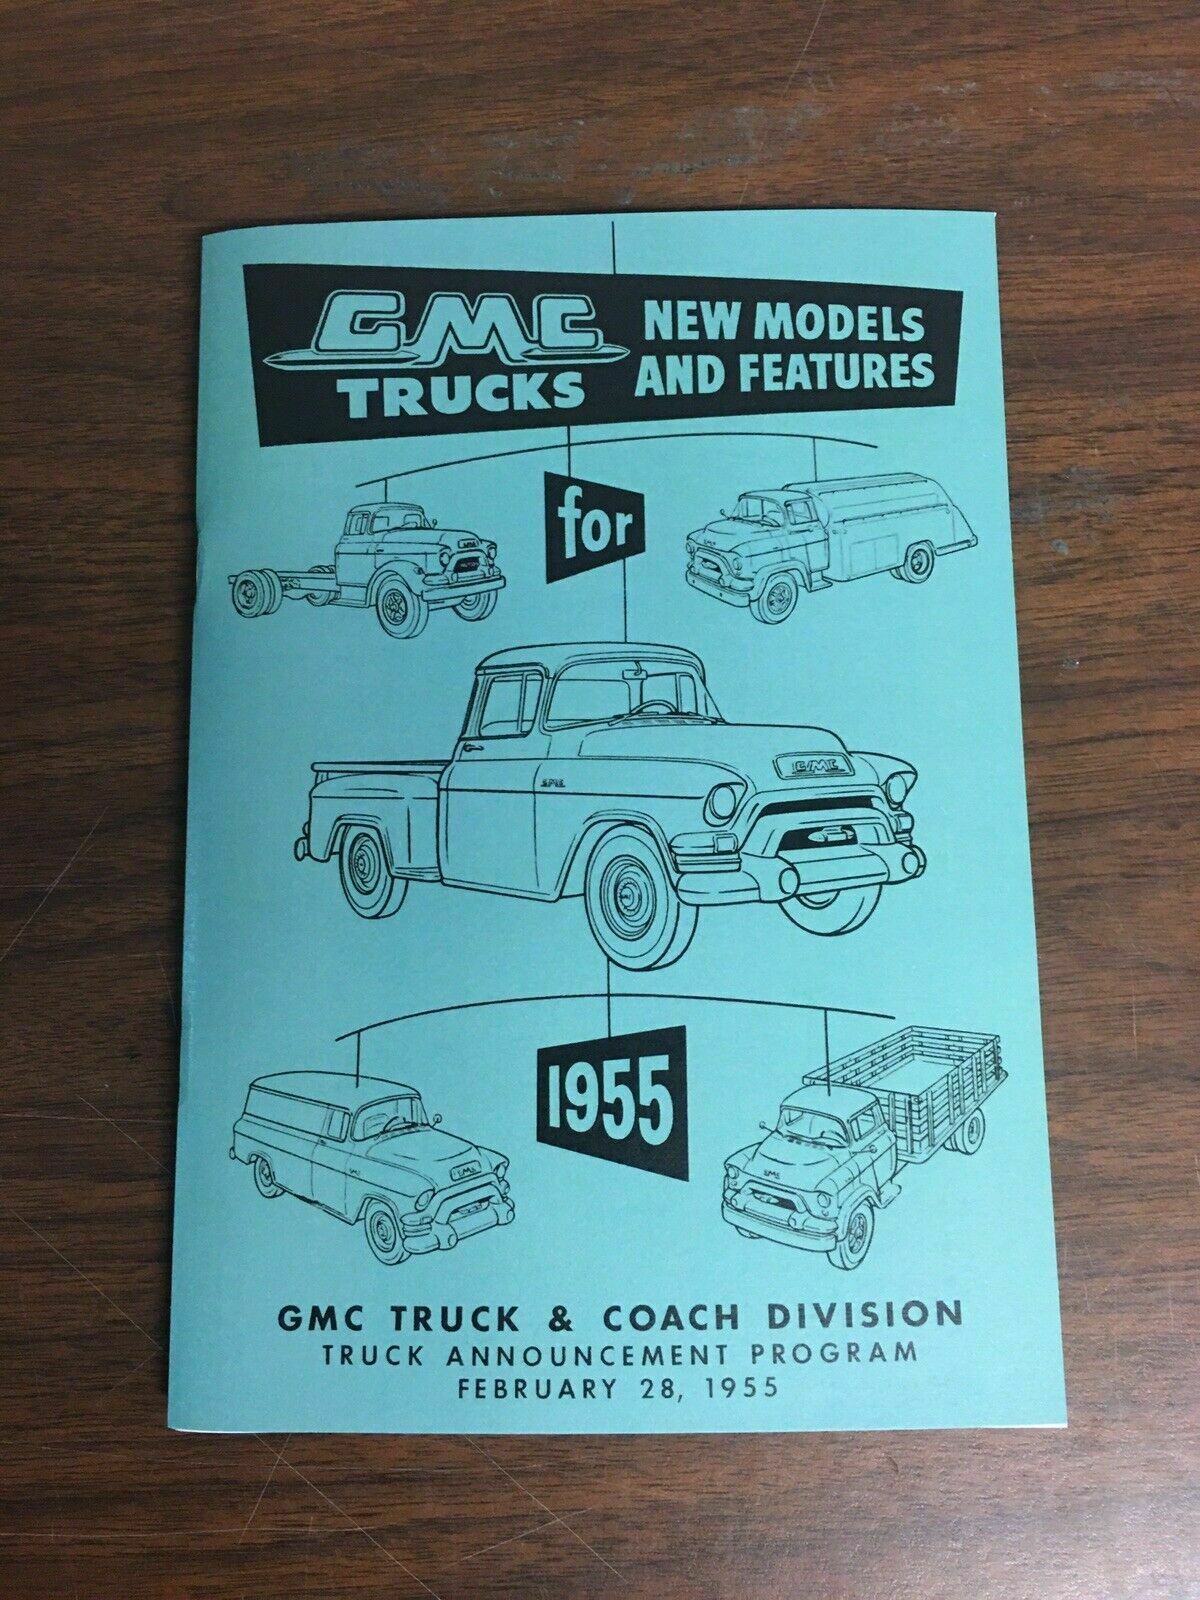 Manuals: 1955 GMC Truck New Models Features Specs And Data Book 60 Page Manual Rare